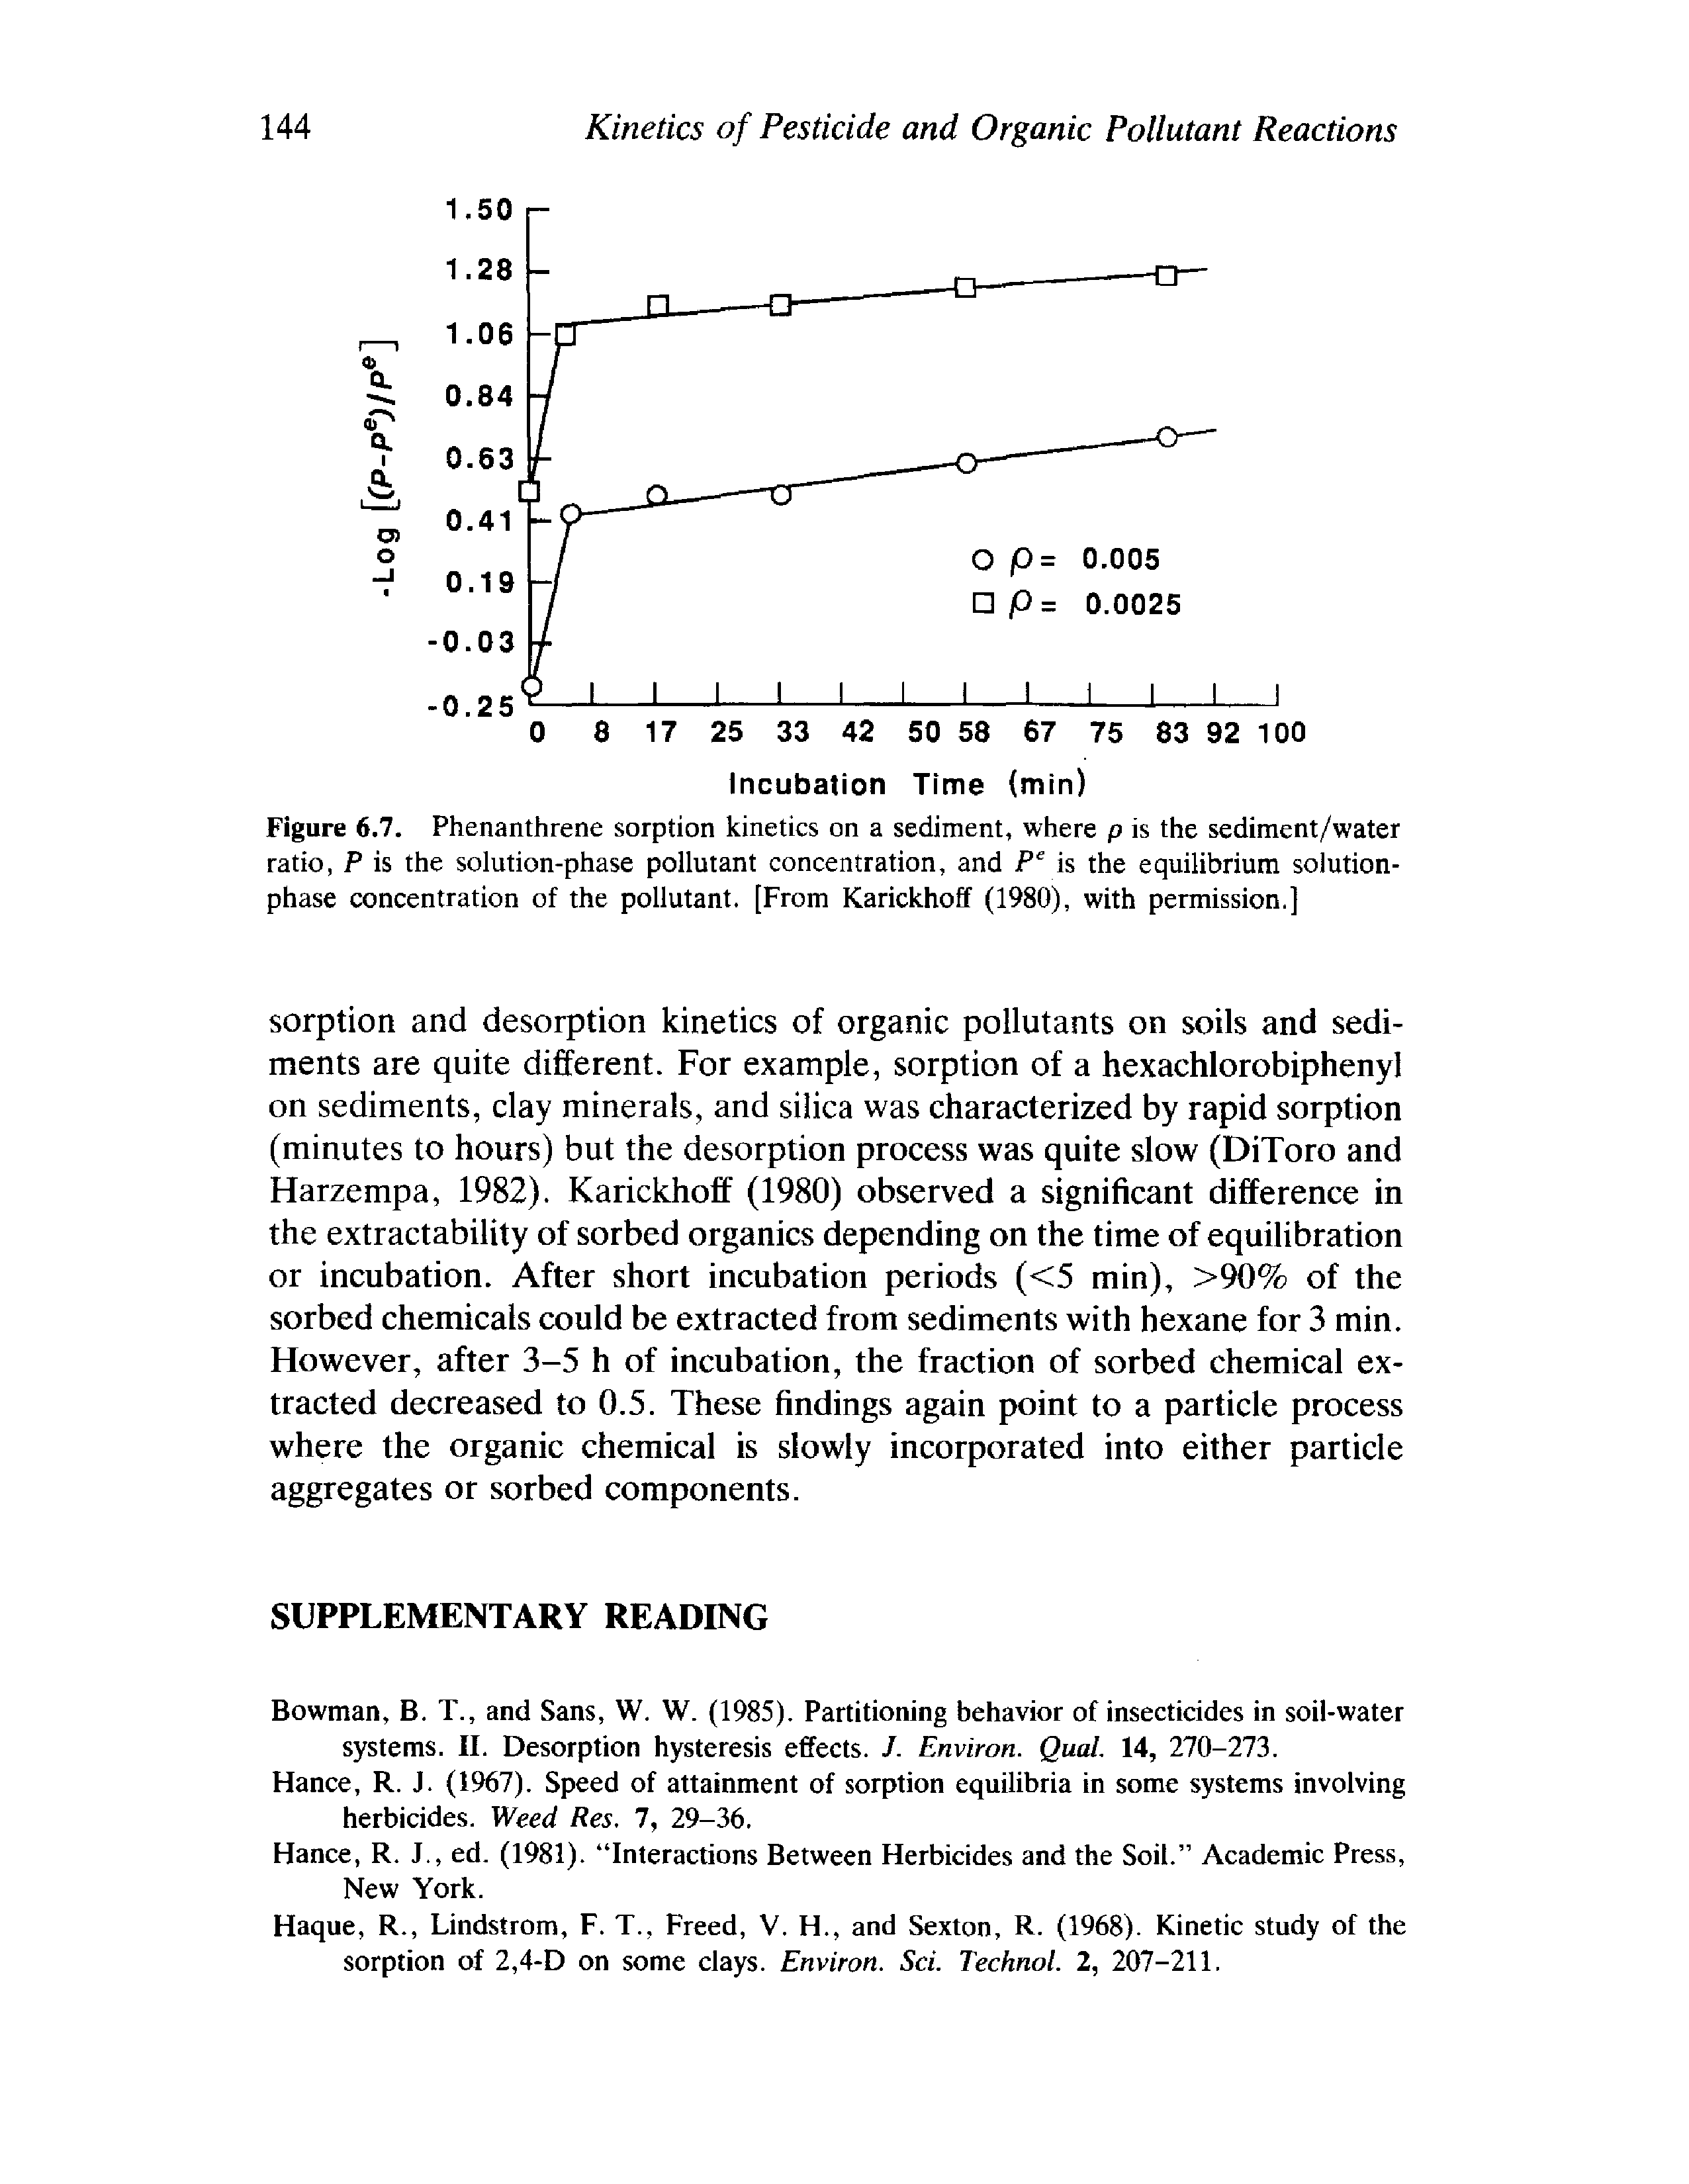 Figure 6.7. Phenanthrene sorption kinetics on a sediment, where p is the sediment/water ratio, P is the solution-phase pollutant concentration, and Pe is the equilibrium solution-phase concentration of the pollutant. [From Karickhoff (1980), with permission.]...